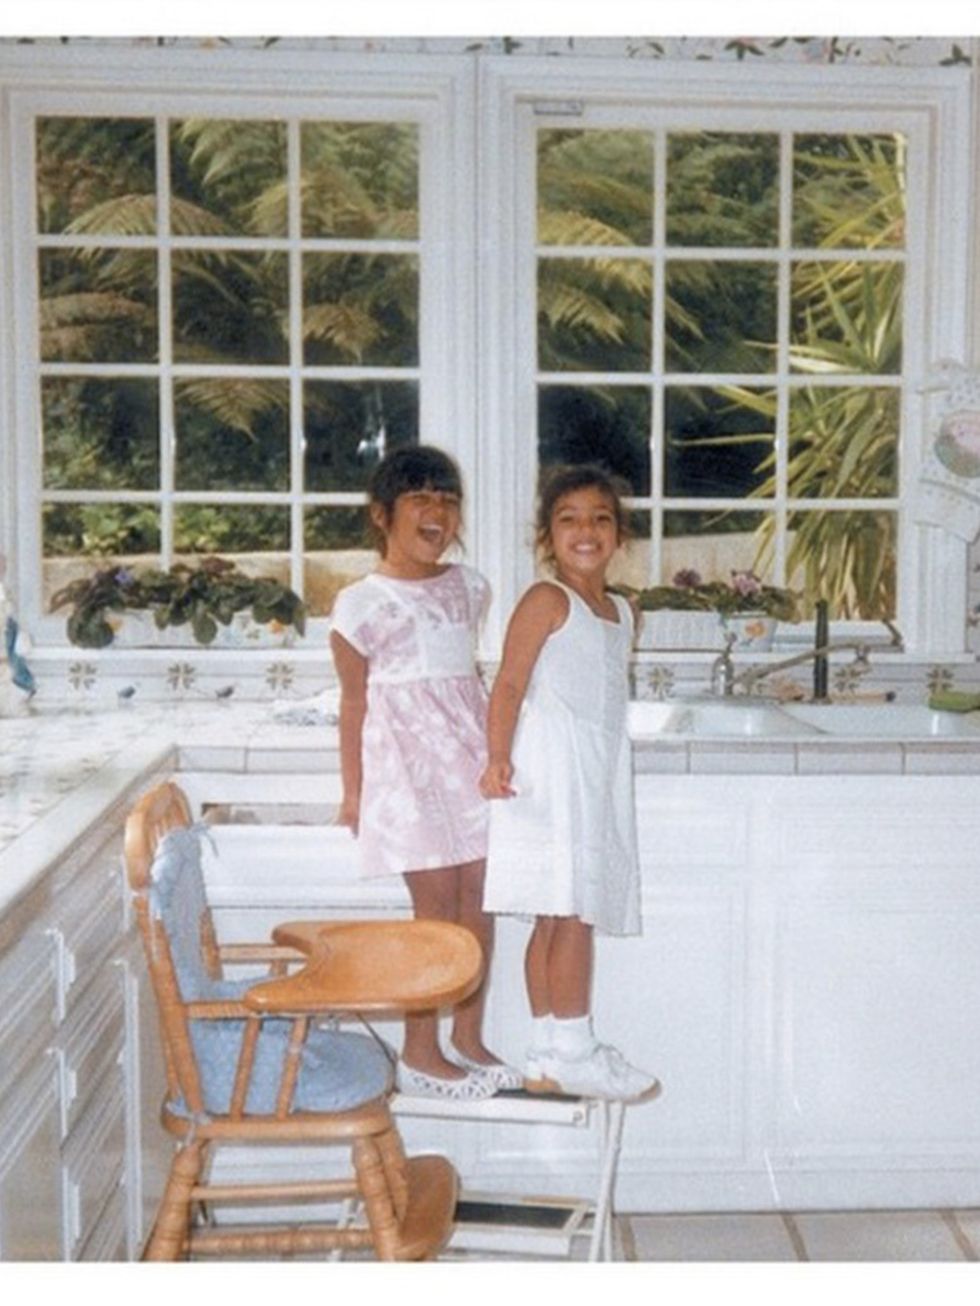 Kourtney Kardashian: 'Even though I was the bossiest older sister she could ask for, she always loved me. Happy birthday to my sidekick. I love you.'